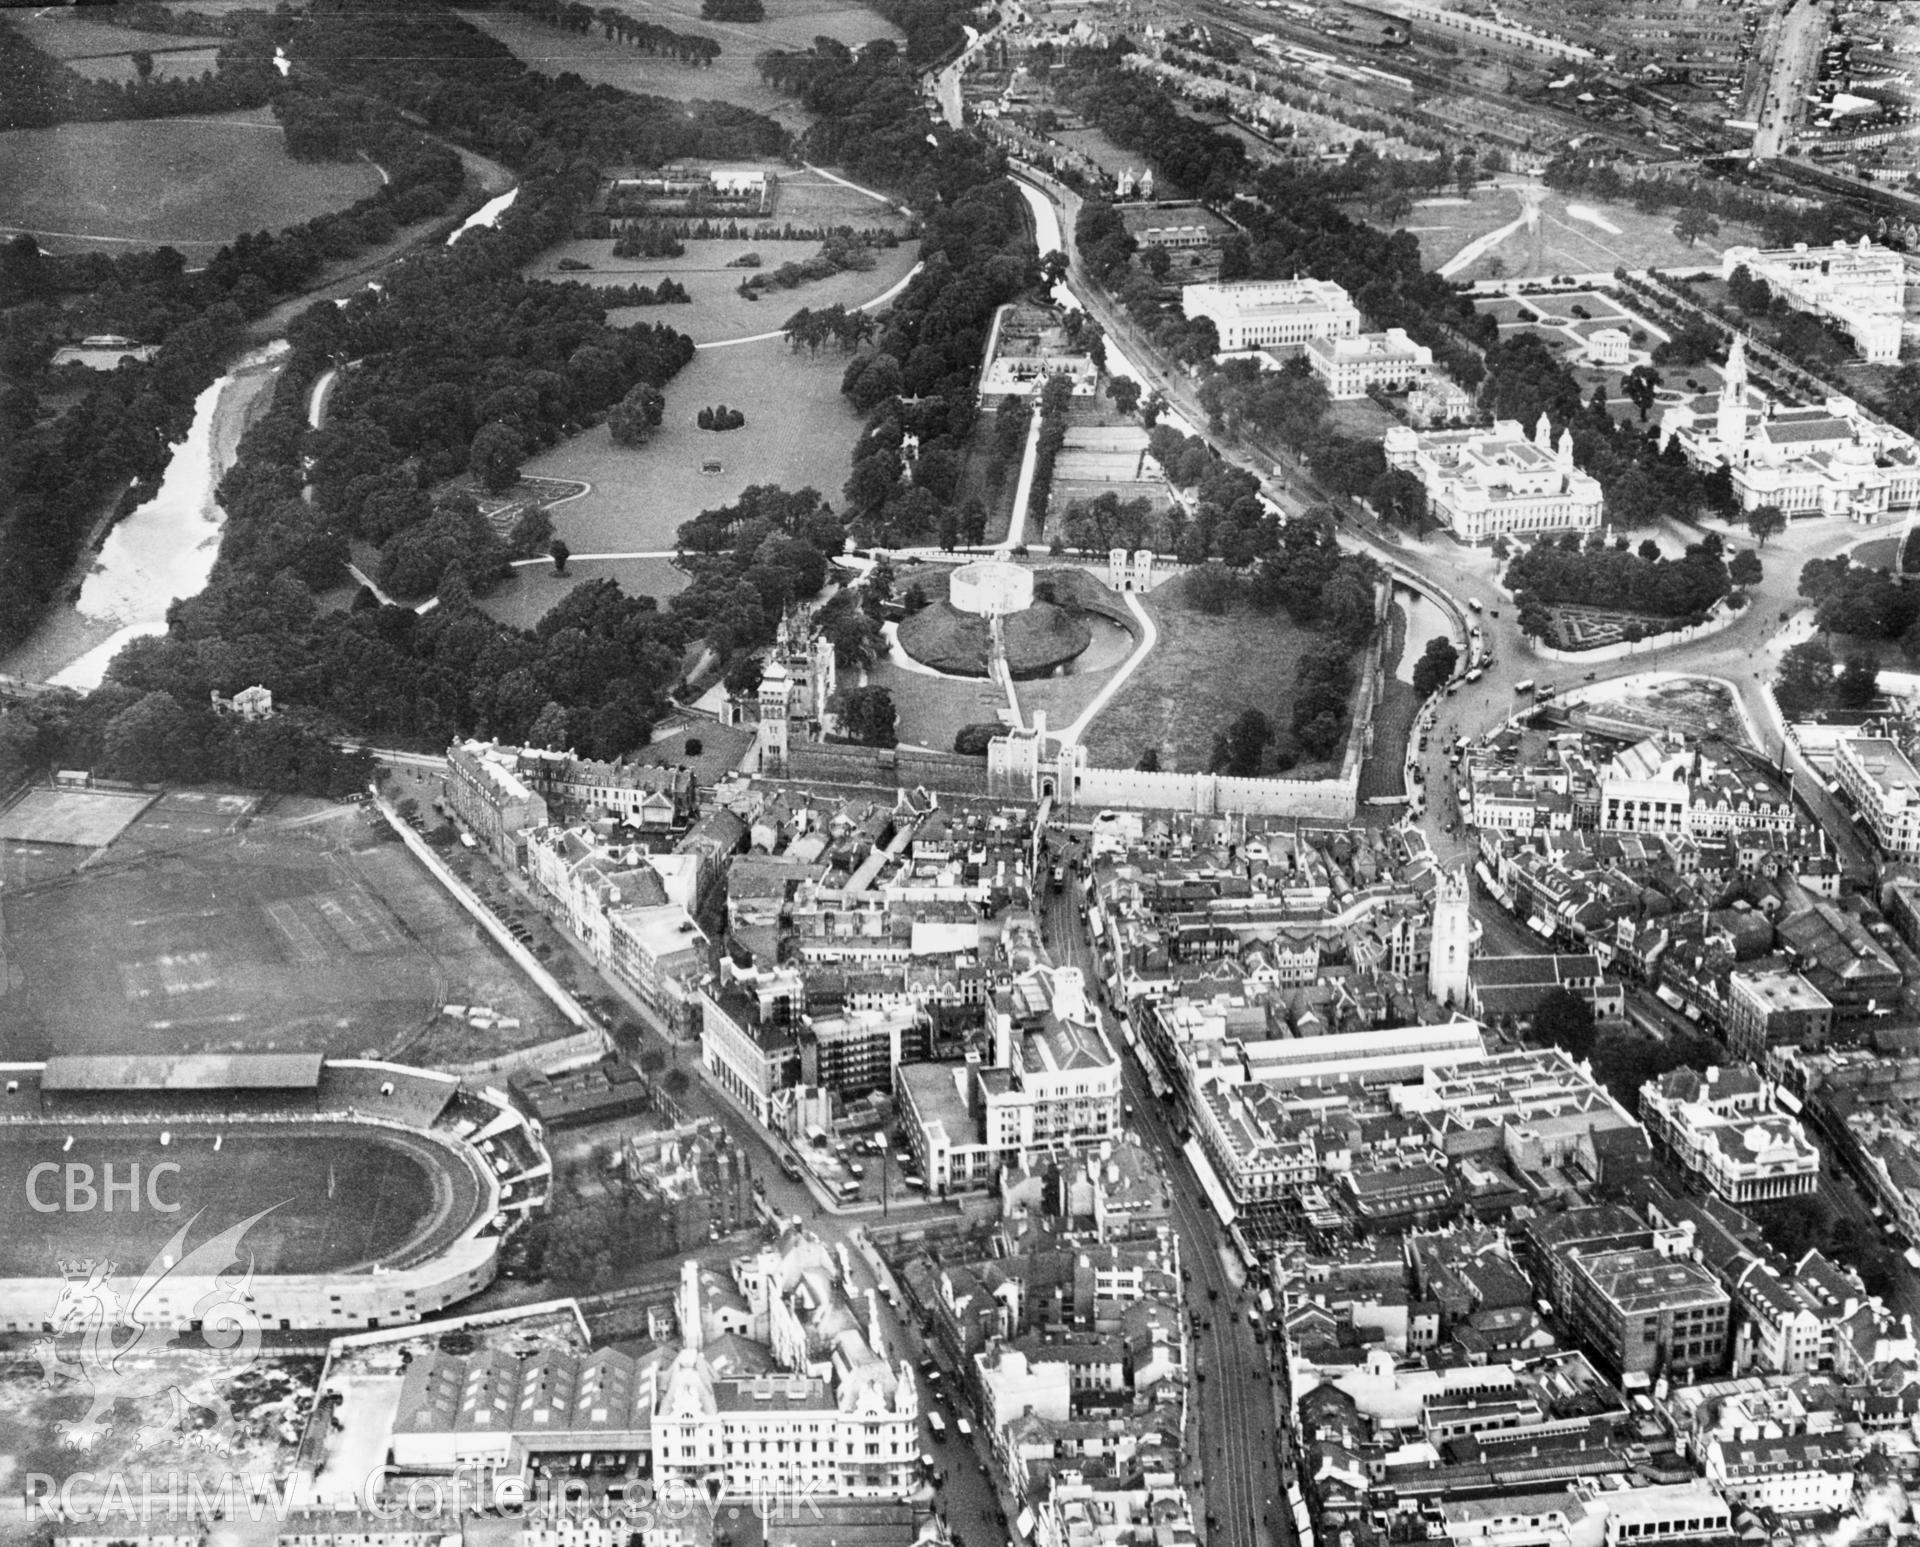 View of Cardiff showing castle, Bute Park and Cardiff Arms Park. Oblique aerial photograph, 5?x4? BW glass plate.